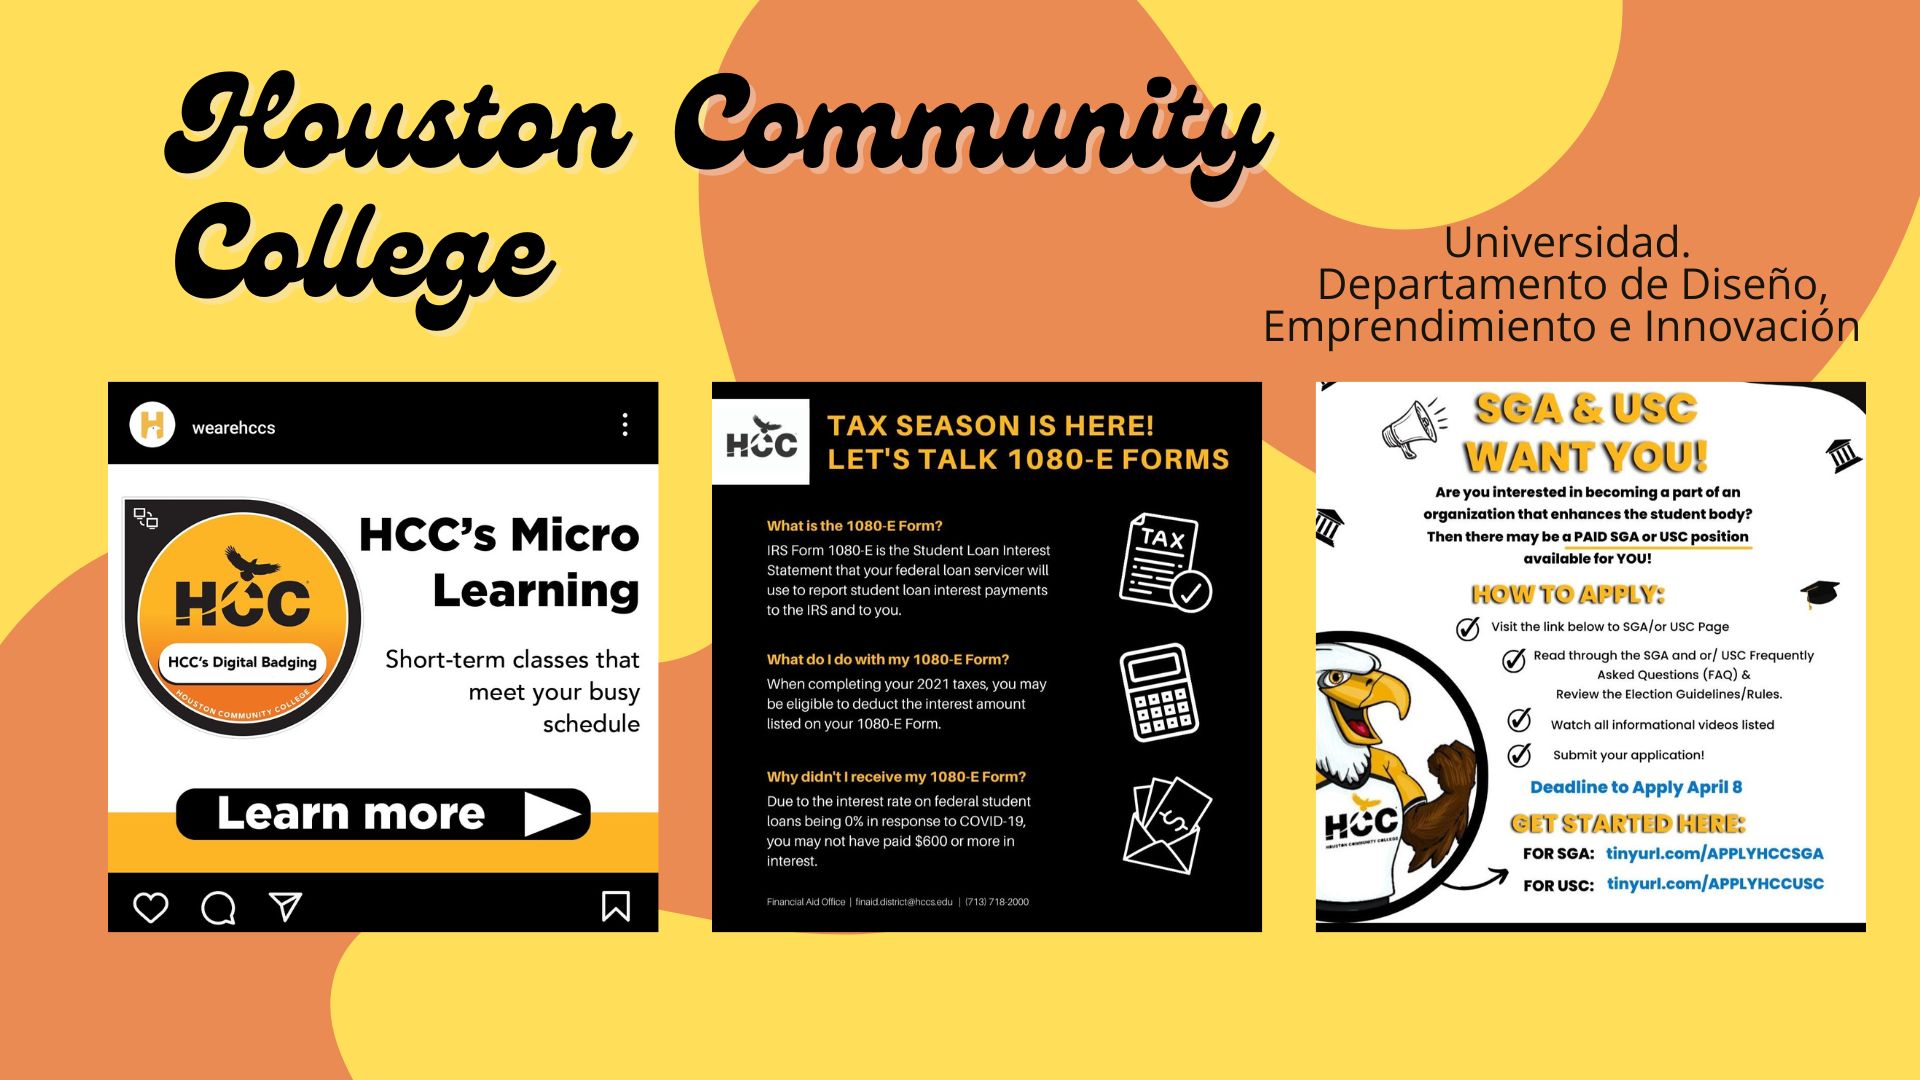 Universidad.

Houston Community
Departamento de Disefio,

Emprendimiento e Innovacion

Pein e SN ———
2 LET'S TALK 1080-E FORMS WANT YOU! S

Are you interested in becoming @ part of an
organization that enhances the student body?

HCC’s Micro seicersnso RR ; mn

Learning preamp -

    

     

MCC's Digital Badging Short-term classes that
RR

meet your busy

schedule

 

st apphcot

Deadline to Apply April 8

CET STARTED KER
FORSGA: tinyurl.com/APPLYHCCSGA

FORUSC: tinyurl.com/APPLYHCCUSC